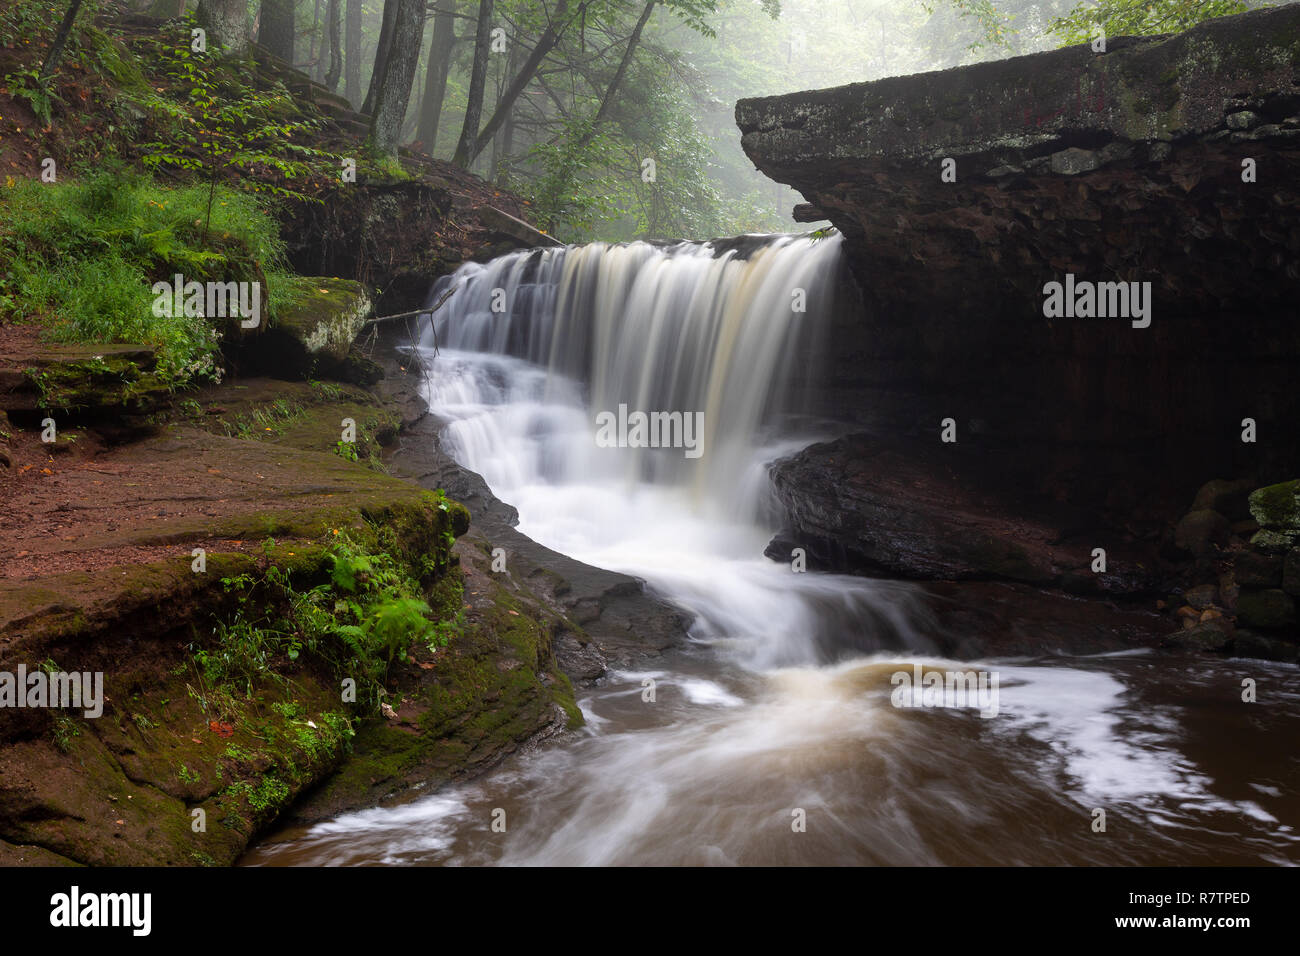 Old ruins creating a dramatic waterfall below a lifting fog from Crum Creek. Kennedy Dells County Park, New York Stock Photo